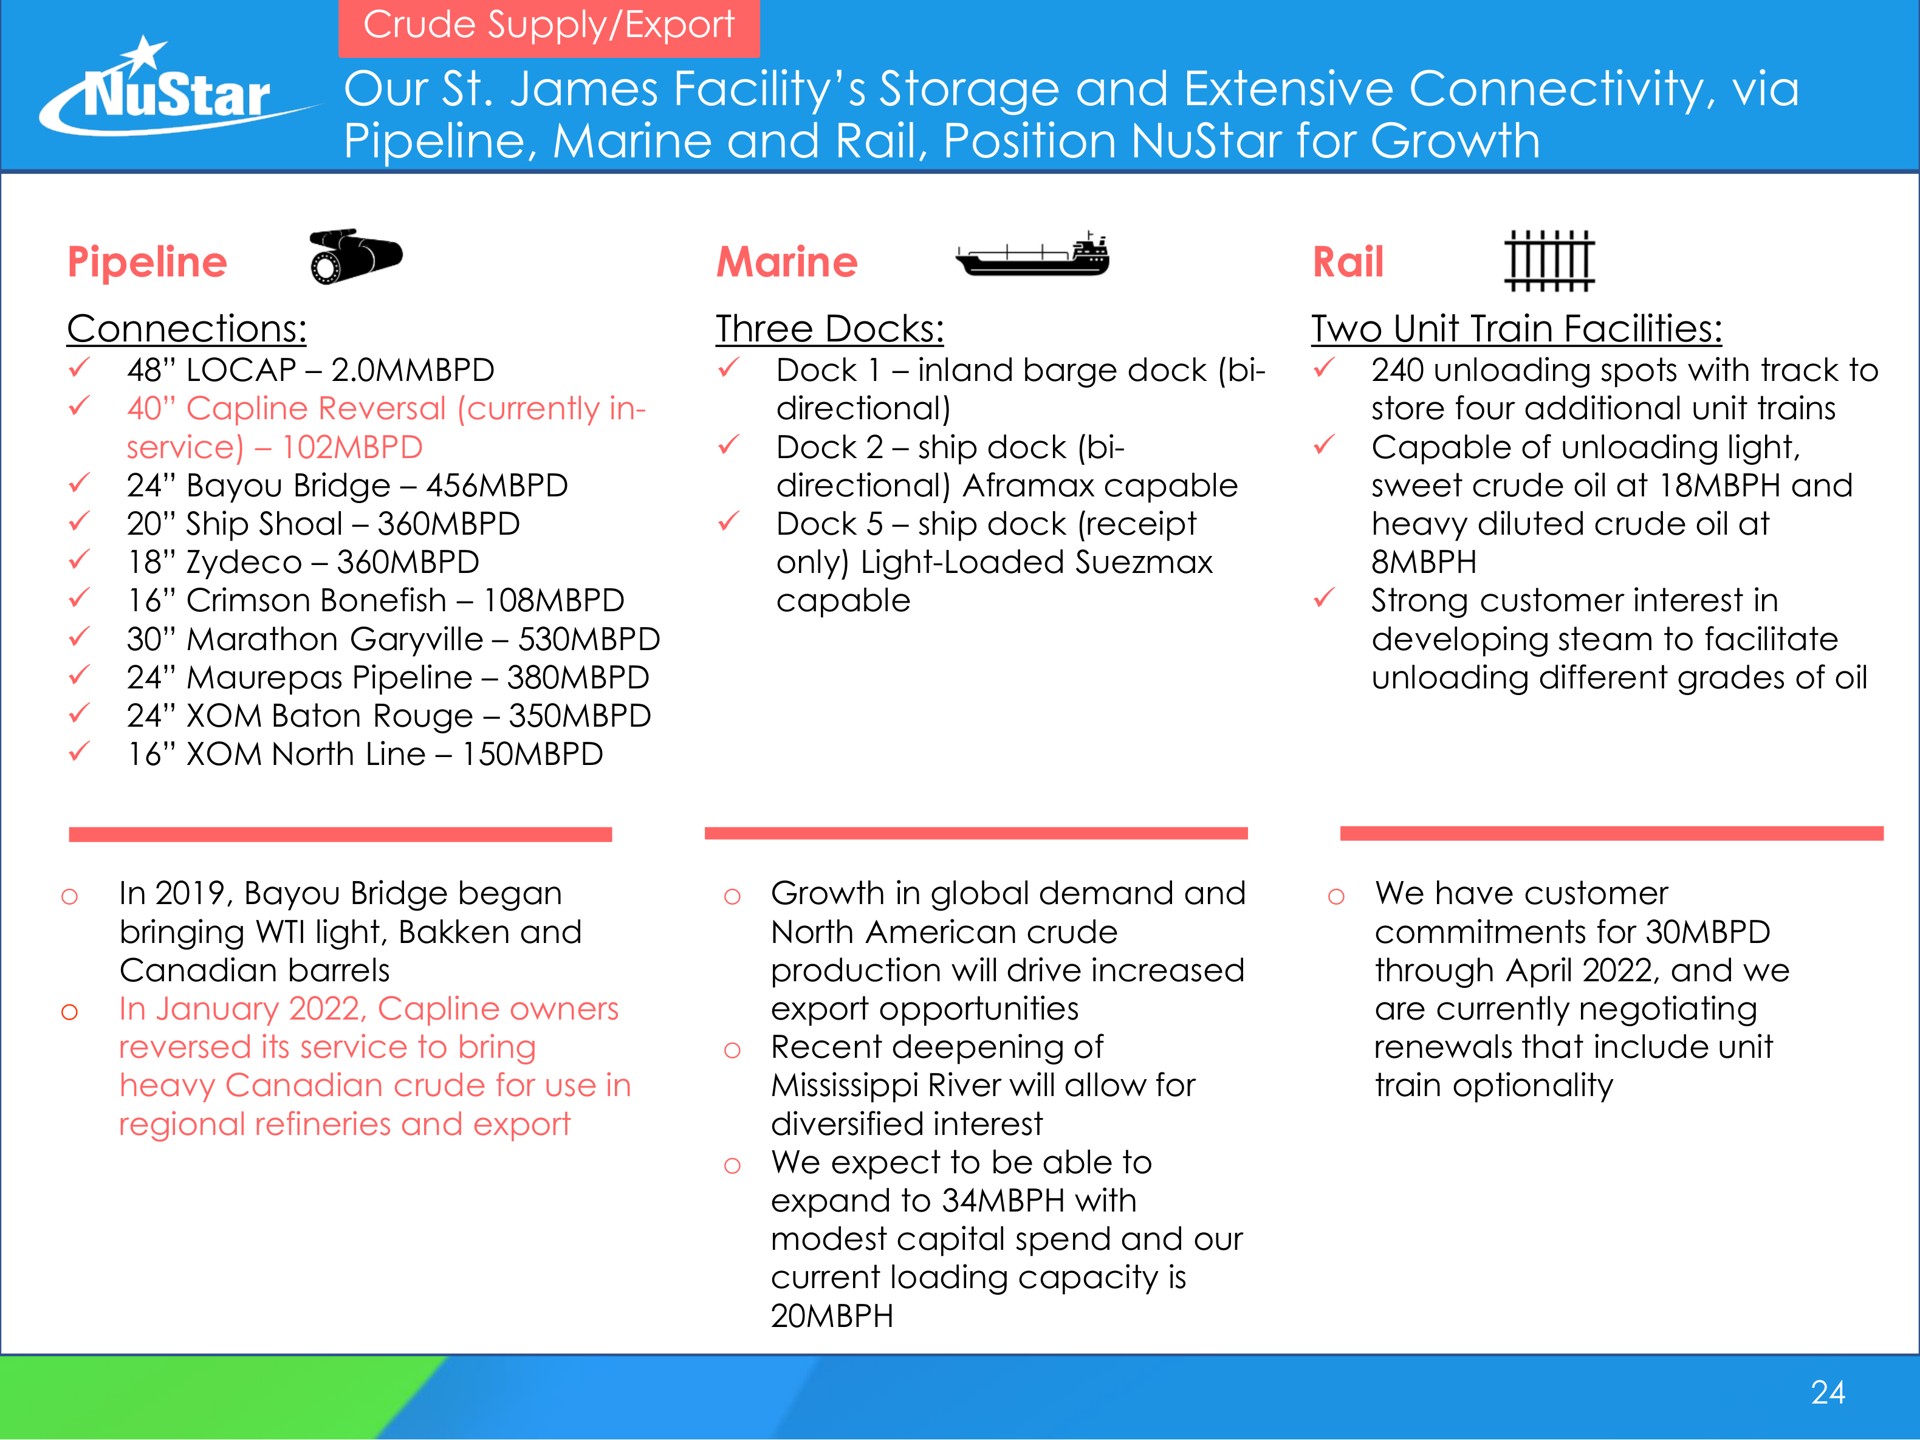 our james facility storage and extensive connectivity via pipeline marine and rail position for growth aster | NuStar Energy